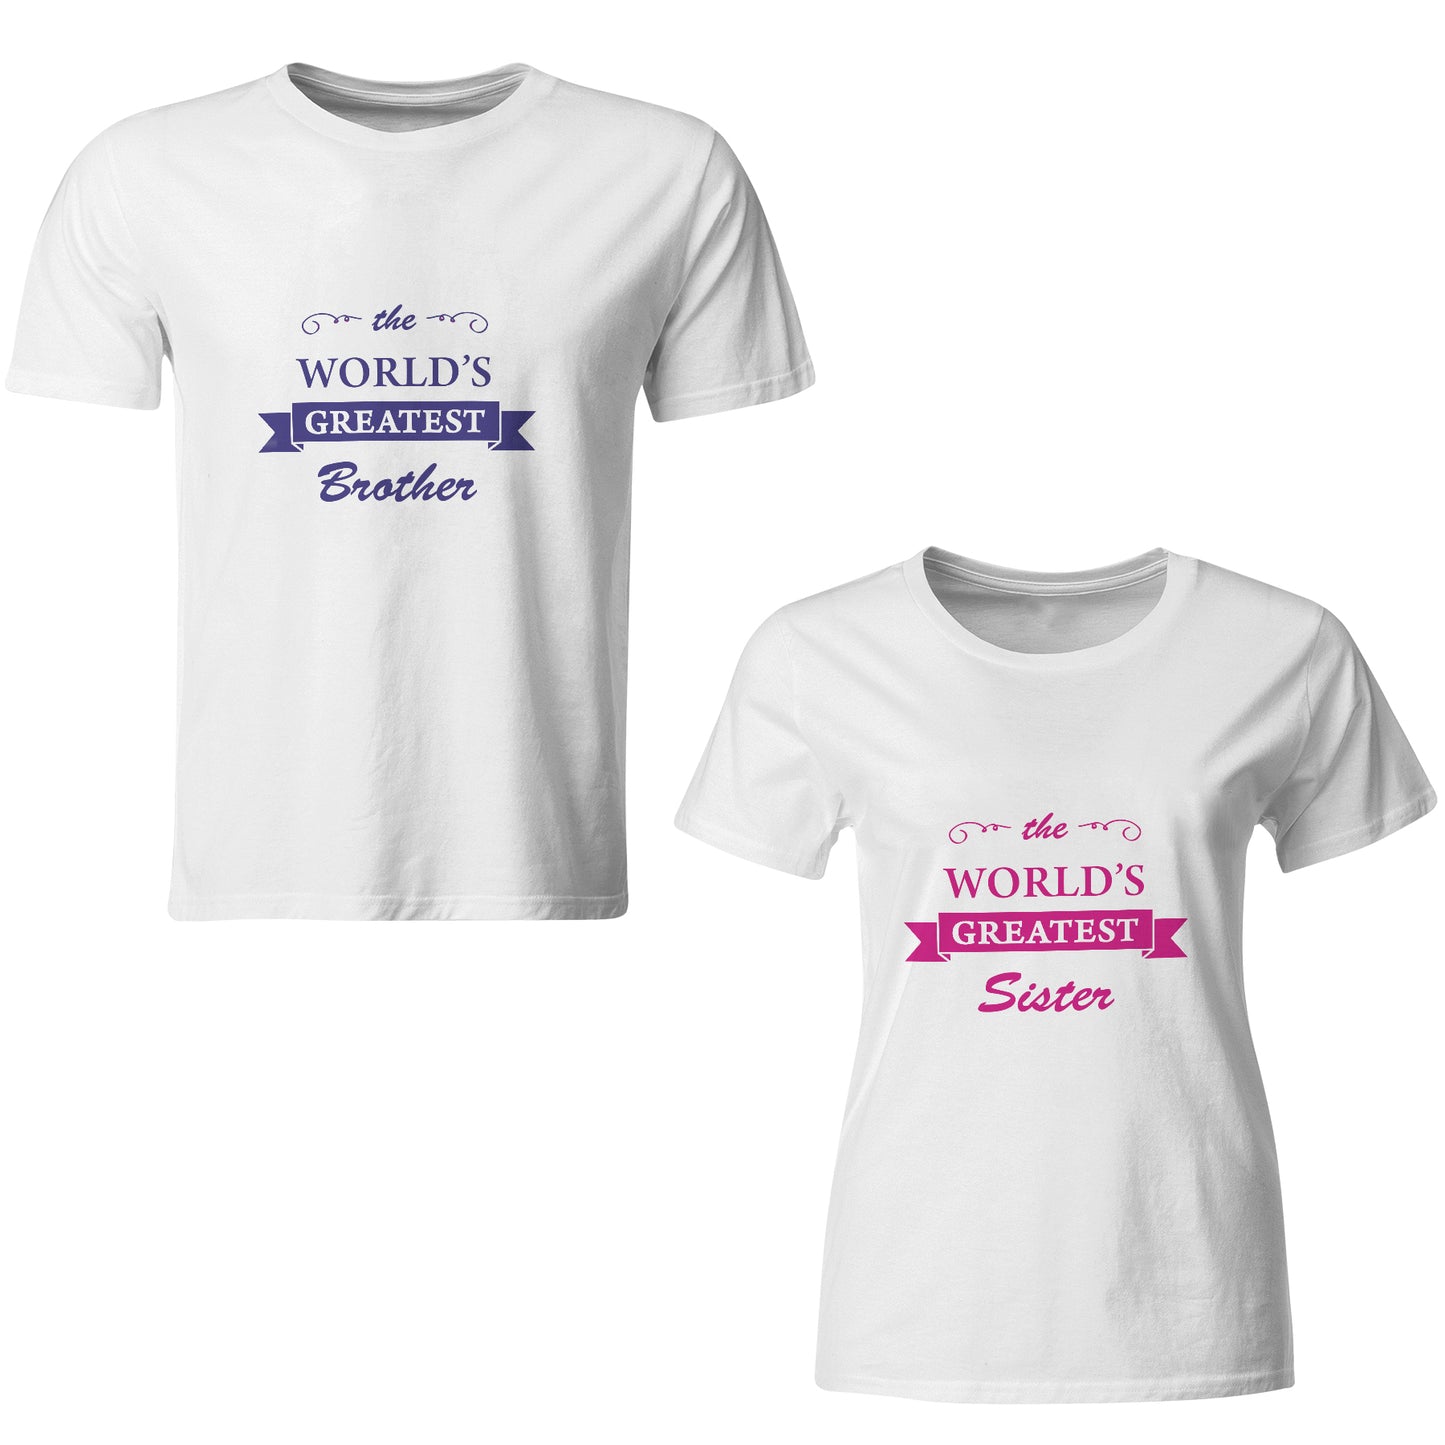 world's greatest brother-world's greatest sister matching Sibling t shirts - white